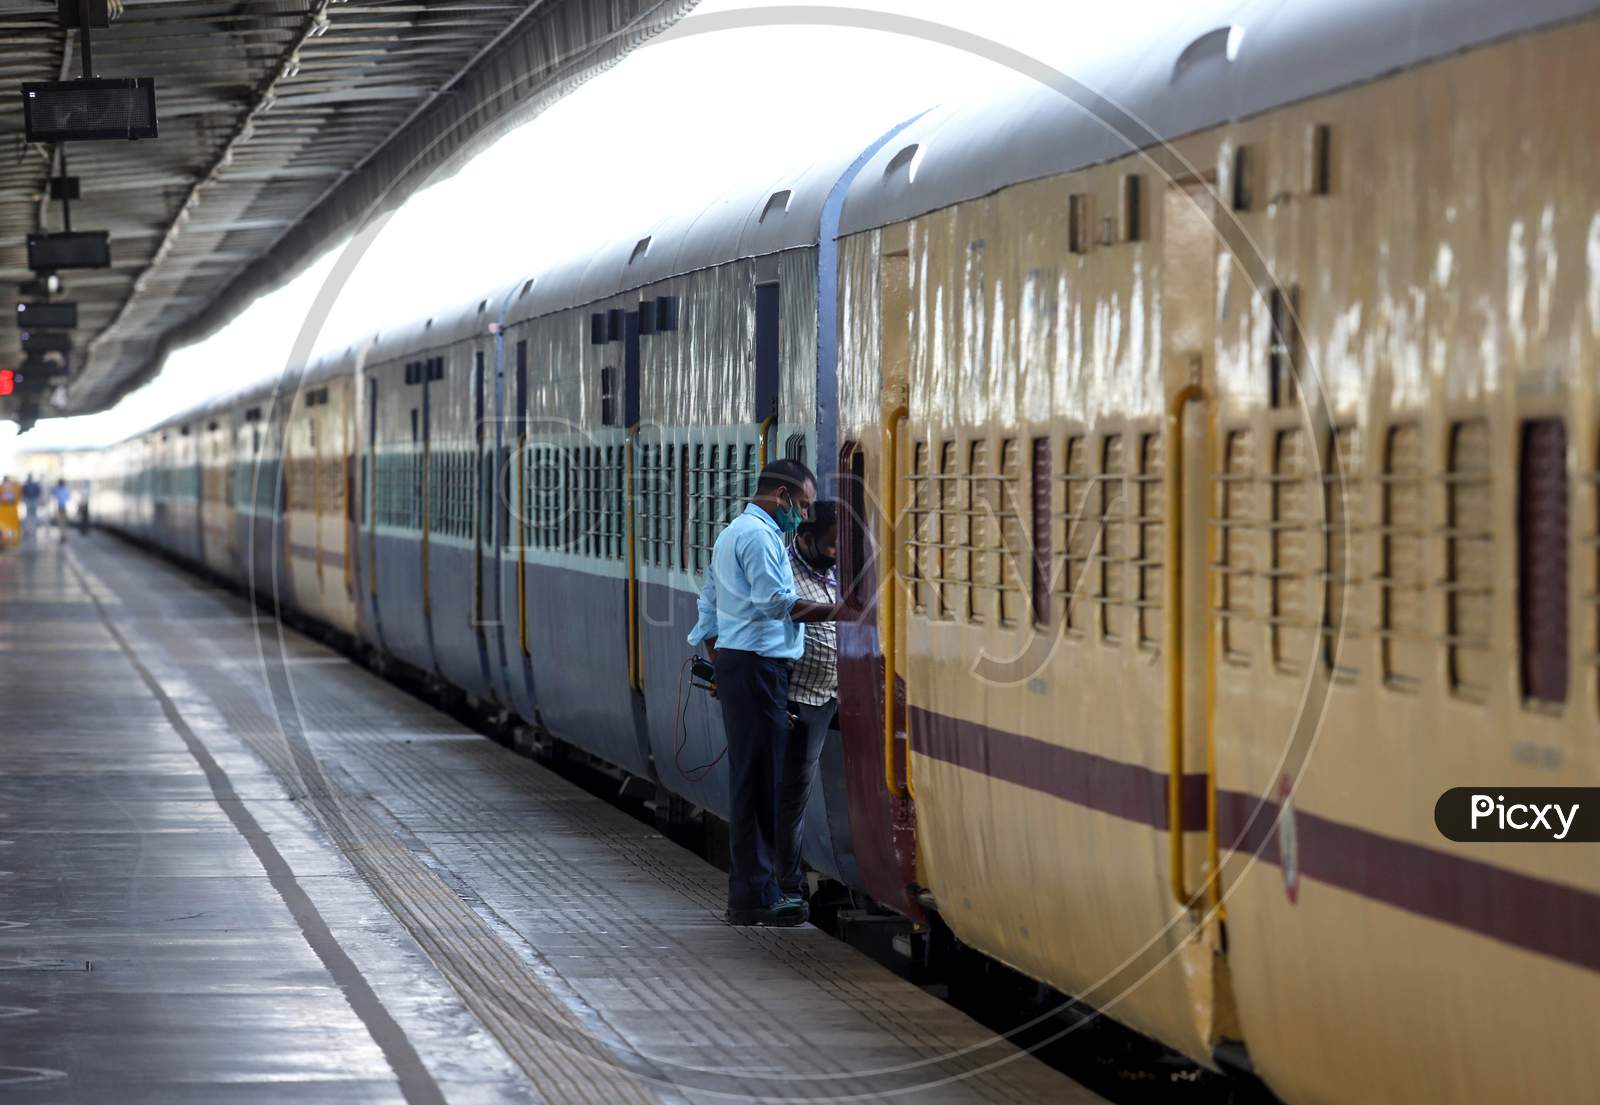 Workers Prepare A Train Carriage As A Temporary Covid-19 Isolation Facility At Anand Vihar Railway Station, In New Delhi On June 17, 2020.